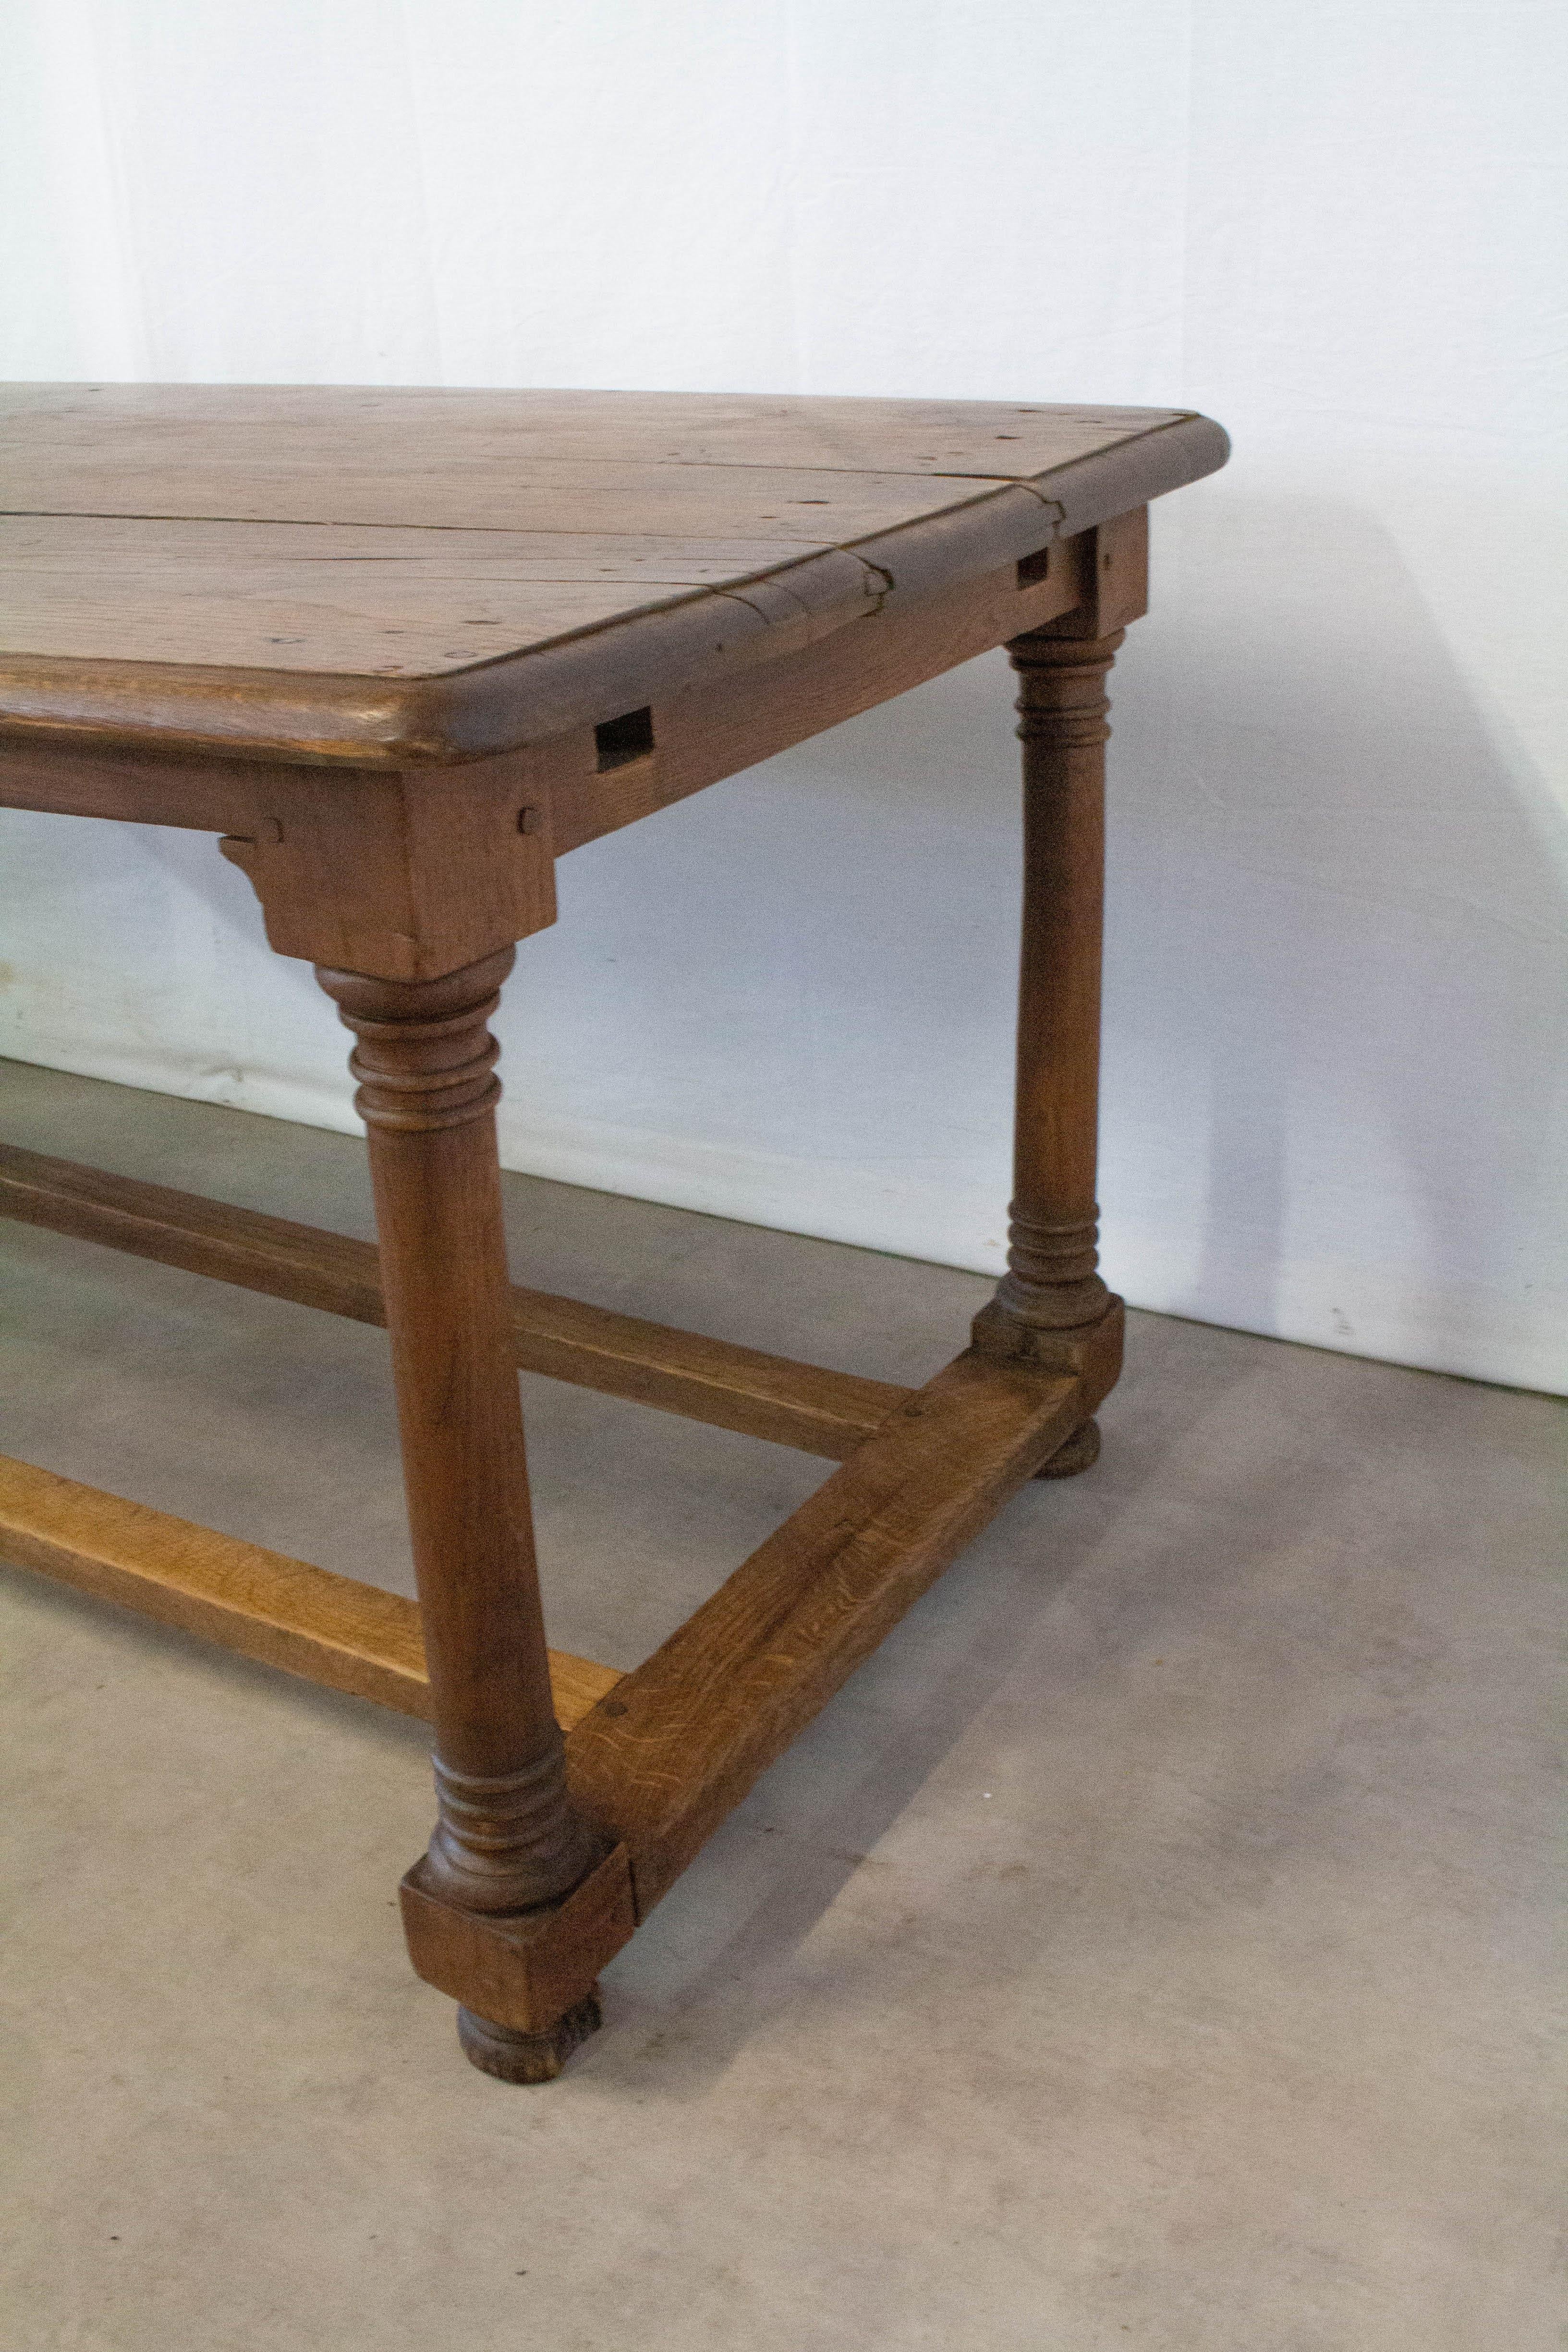 French Refectory Table Late 18th Century Provincial Oak Server Dining Table 3